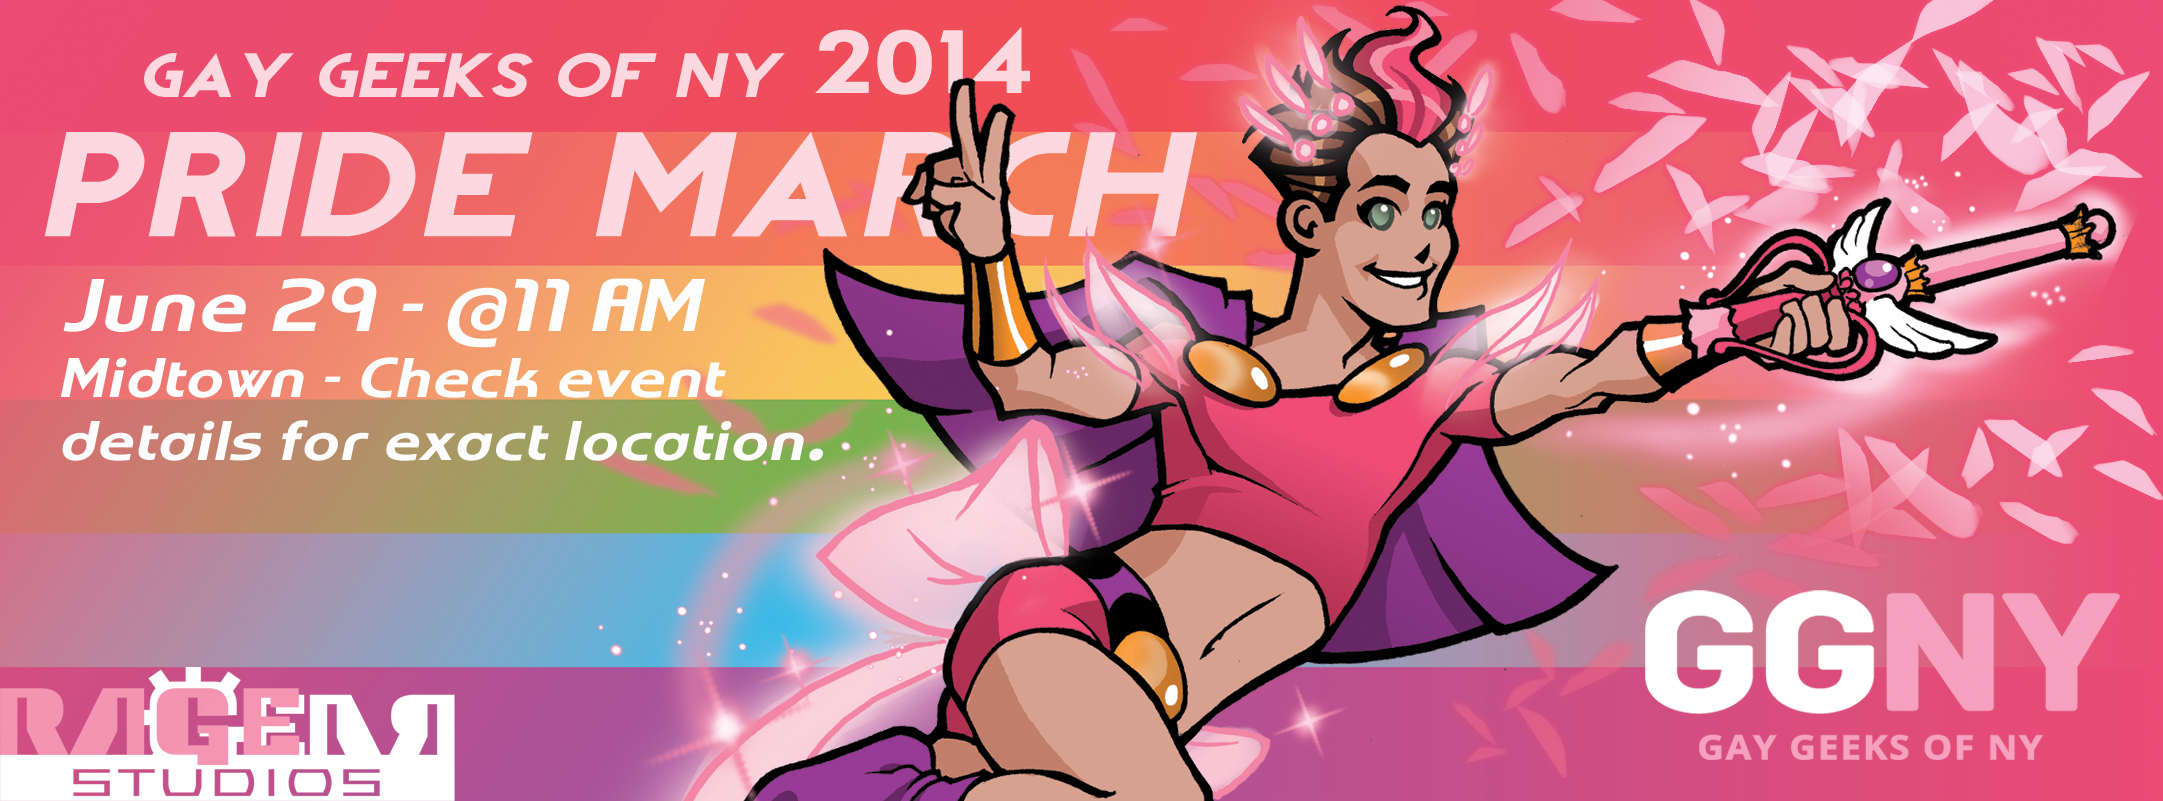 GGNY2014PrideMarchFBbanner.png